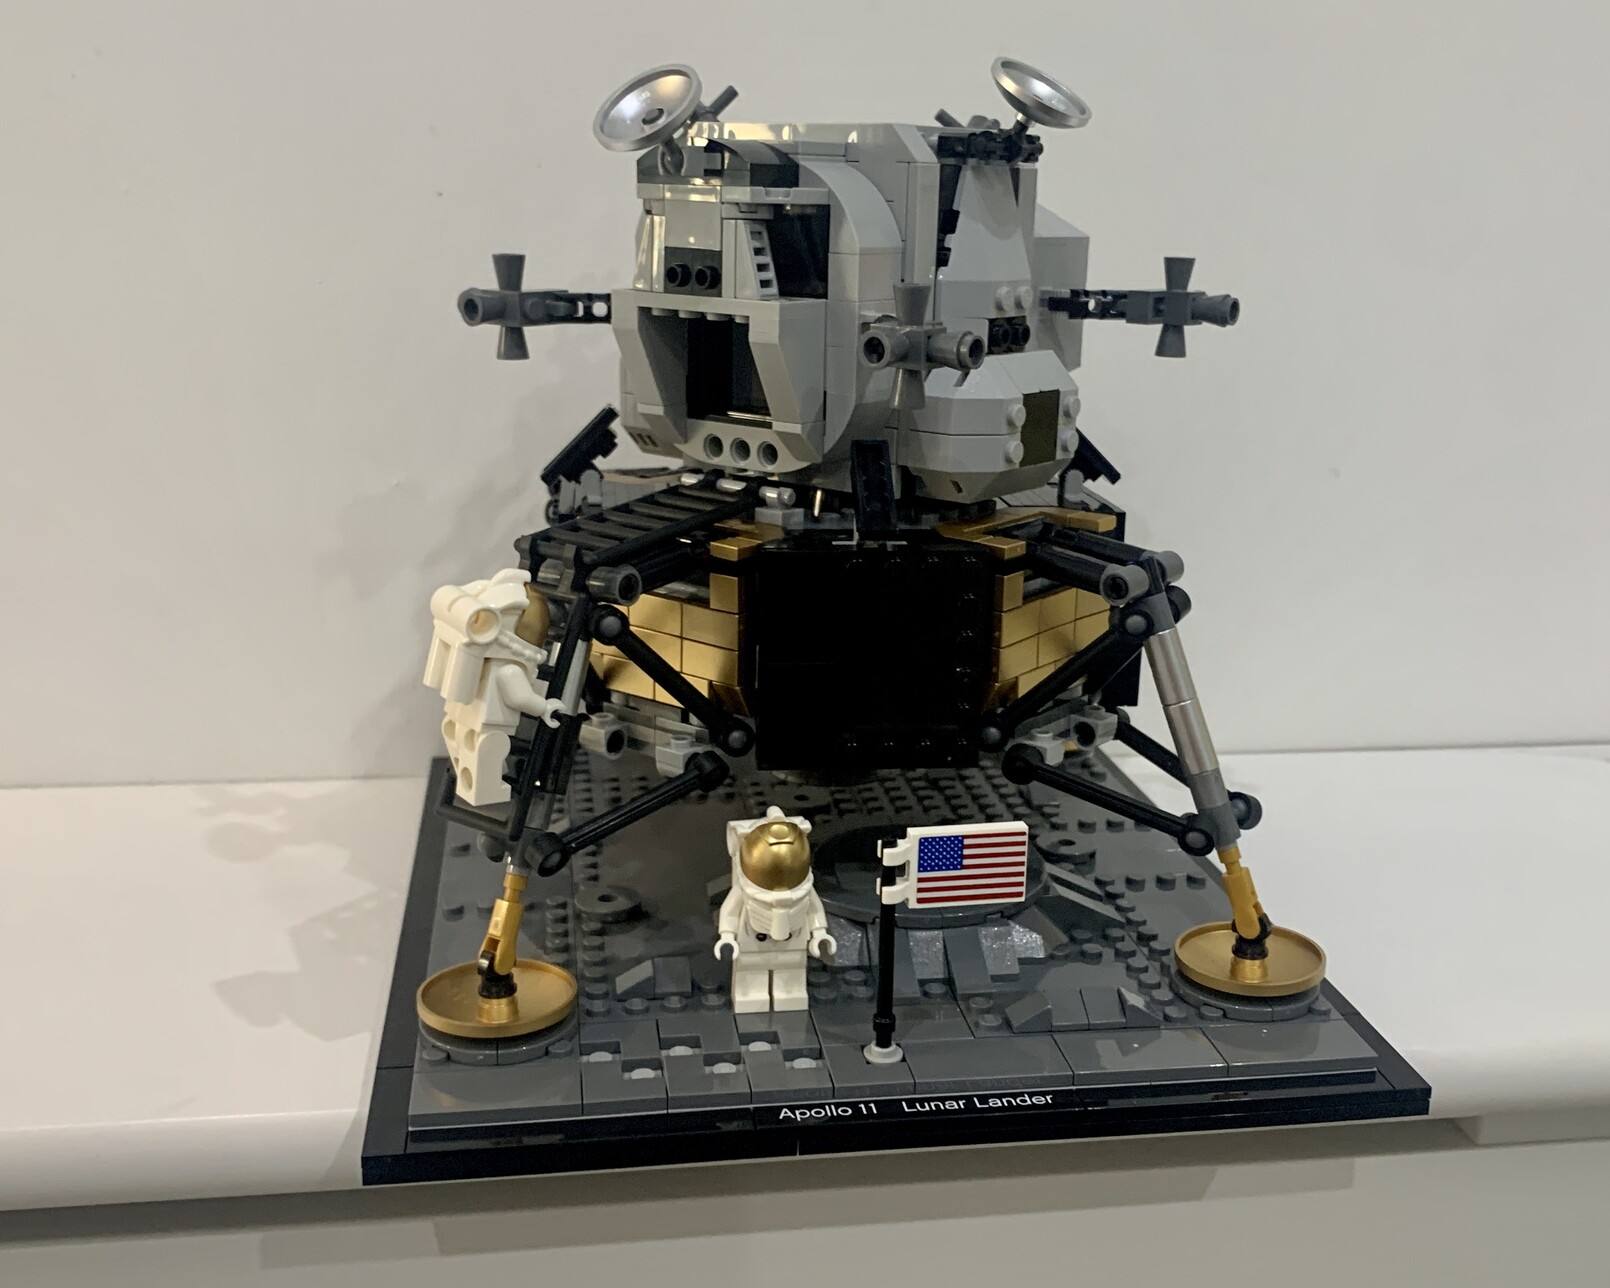 Built Lego Nasa Apollo 11 Lander. The Lunar lander is in a “just landed” configuration with all parts present. The lander is sat on a grey surface representing the moon. One astronaut is climing down the ladder on the closest left leg while the other is standing in front of the lander next to an American flag.